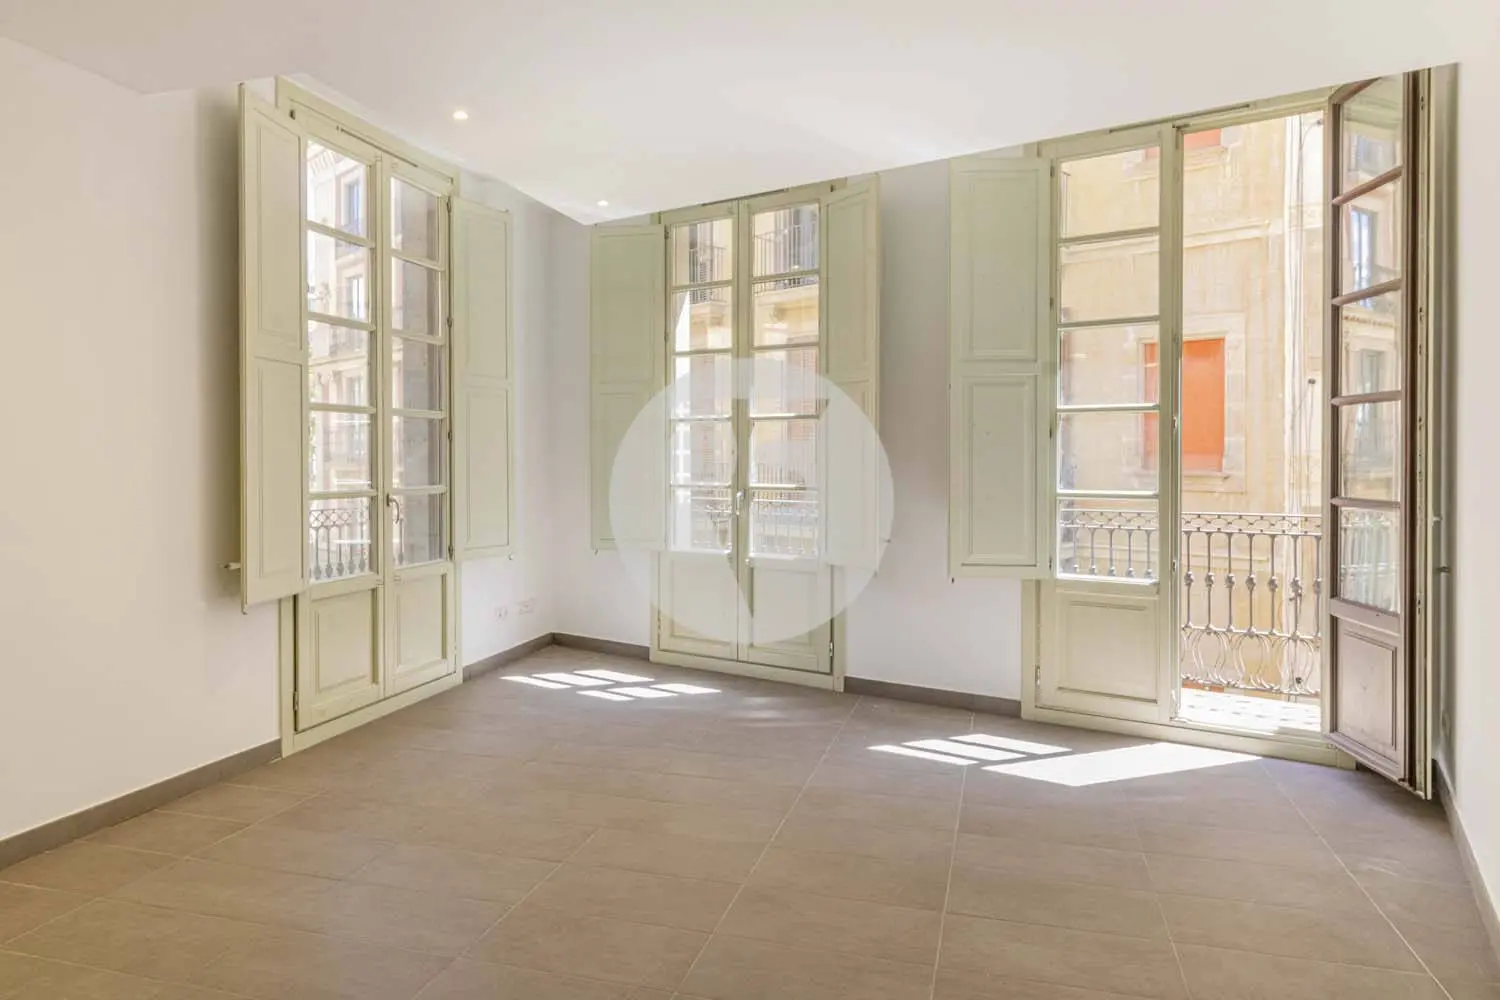 Two bedrooms in the heart of the city